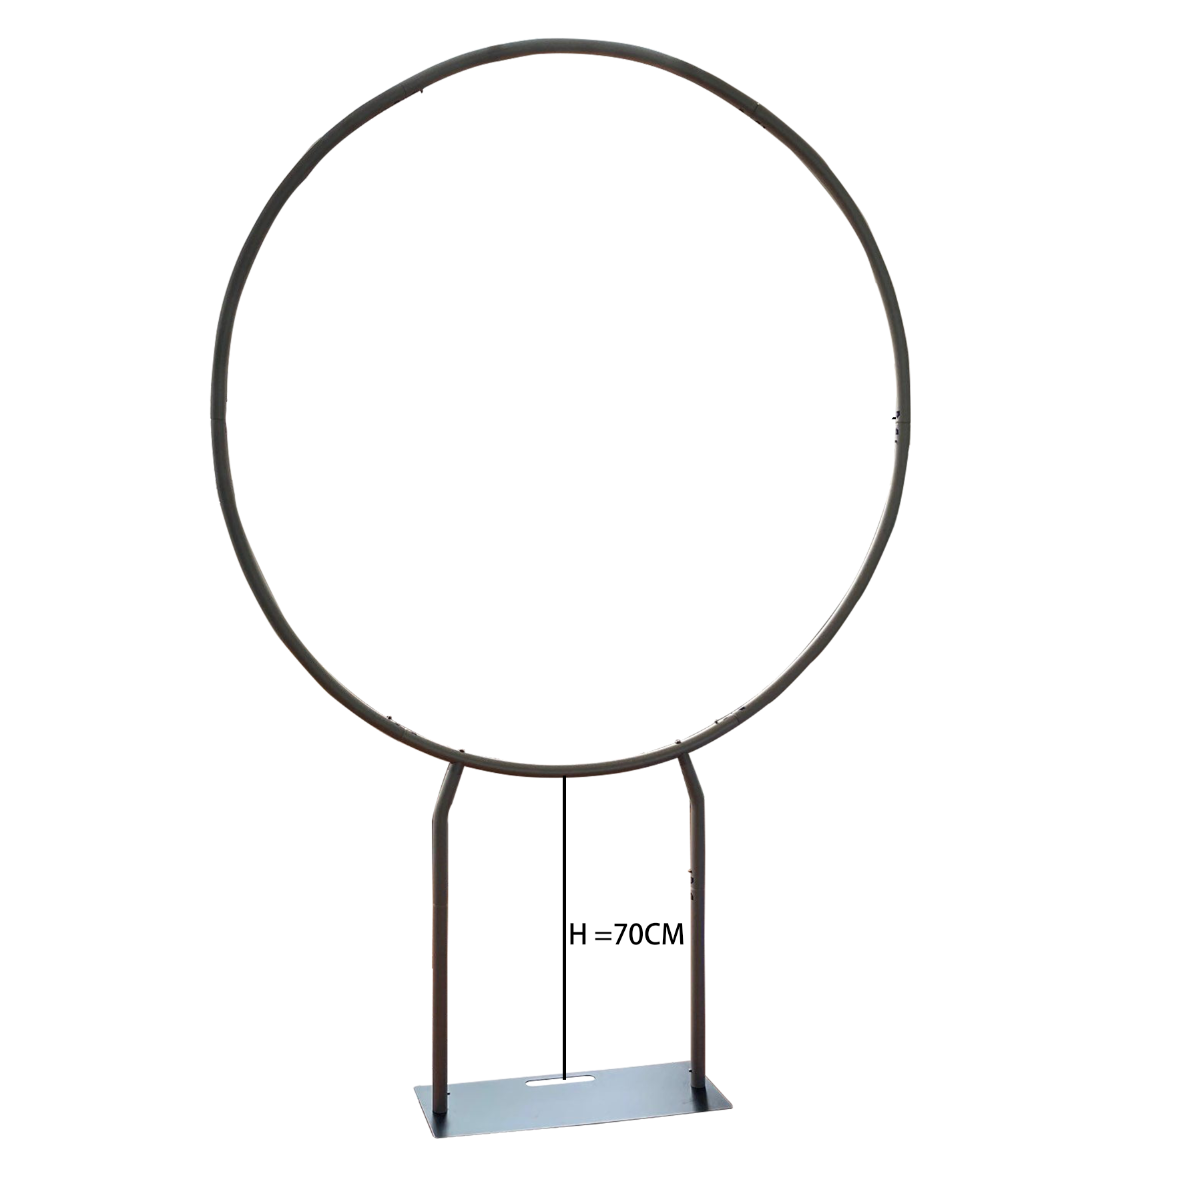 5ft Round Circle Backdrop + Circle Stand + 3 Cylinders + 3 Pedestal Covers-ueventsupplies